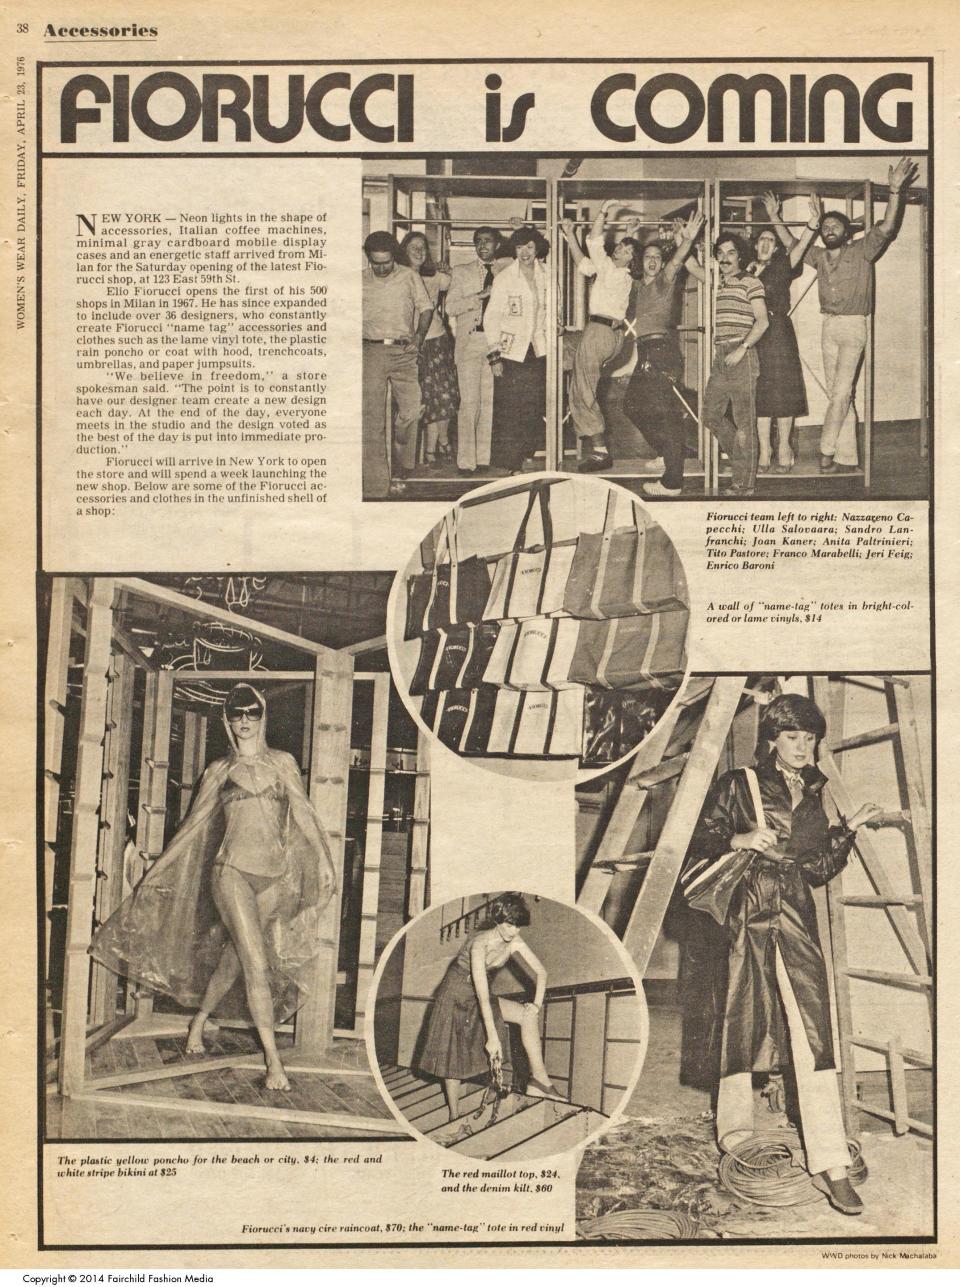 A WWD report about the opening of the Fiorucci store in New York, 1976. - Credit: WWD